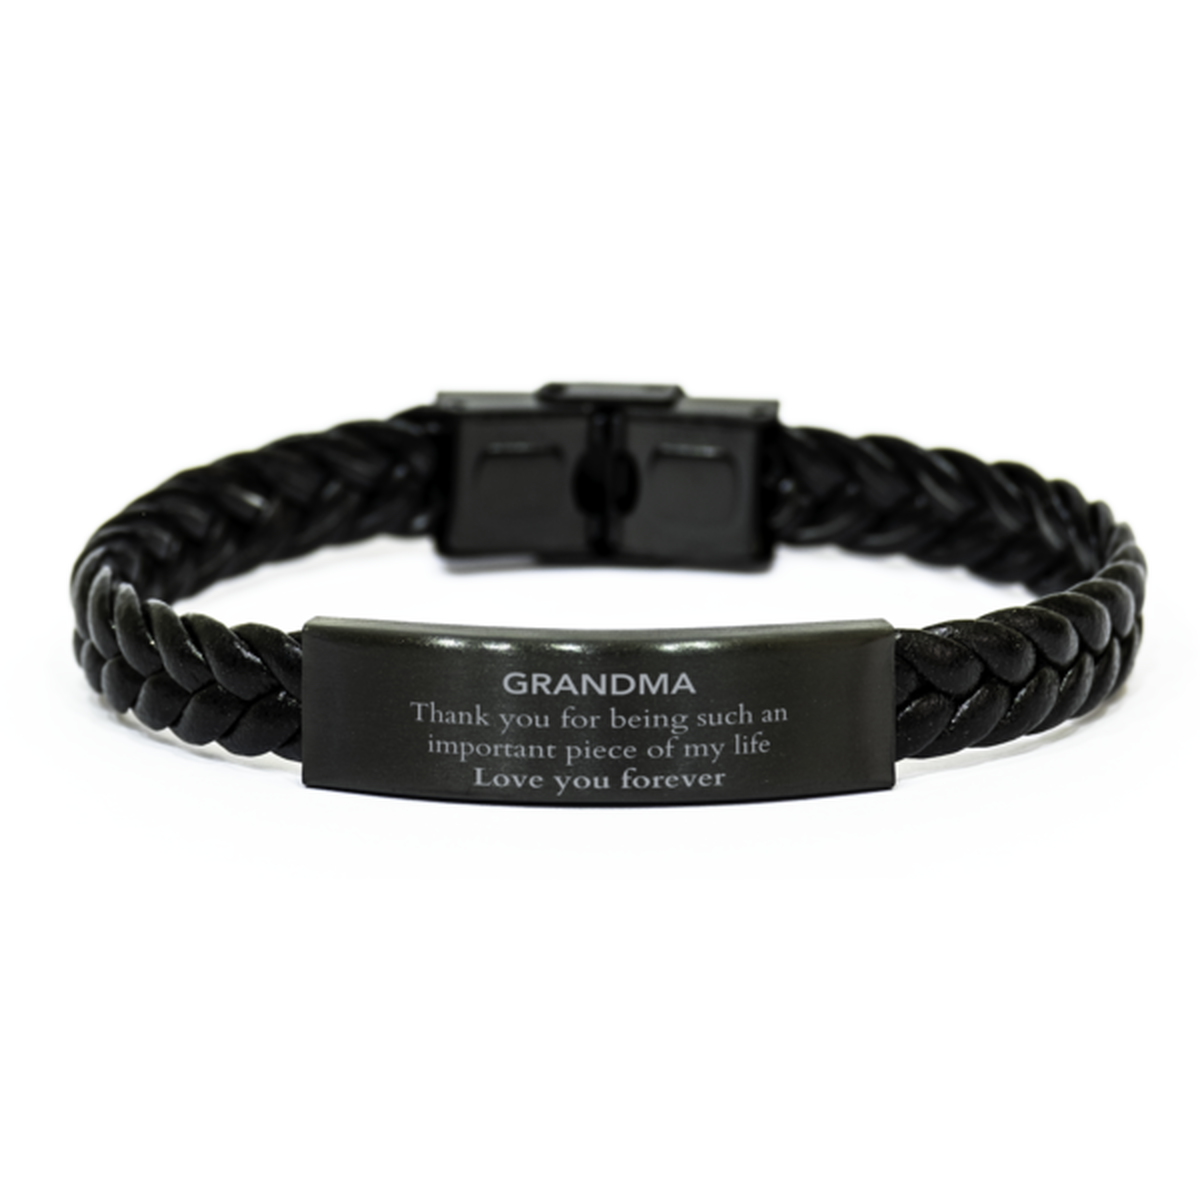 Appropriate Grandma Braided Leather Bracelet Epic Birthday Gifts for Grandma Thank you for being such an important piece of my life Grandma Christmas Mothers Fathers Day